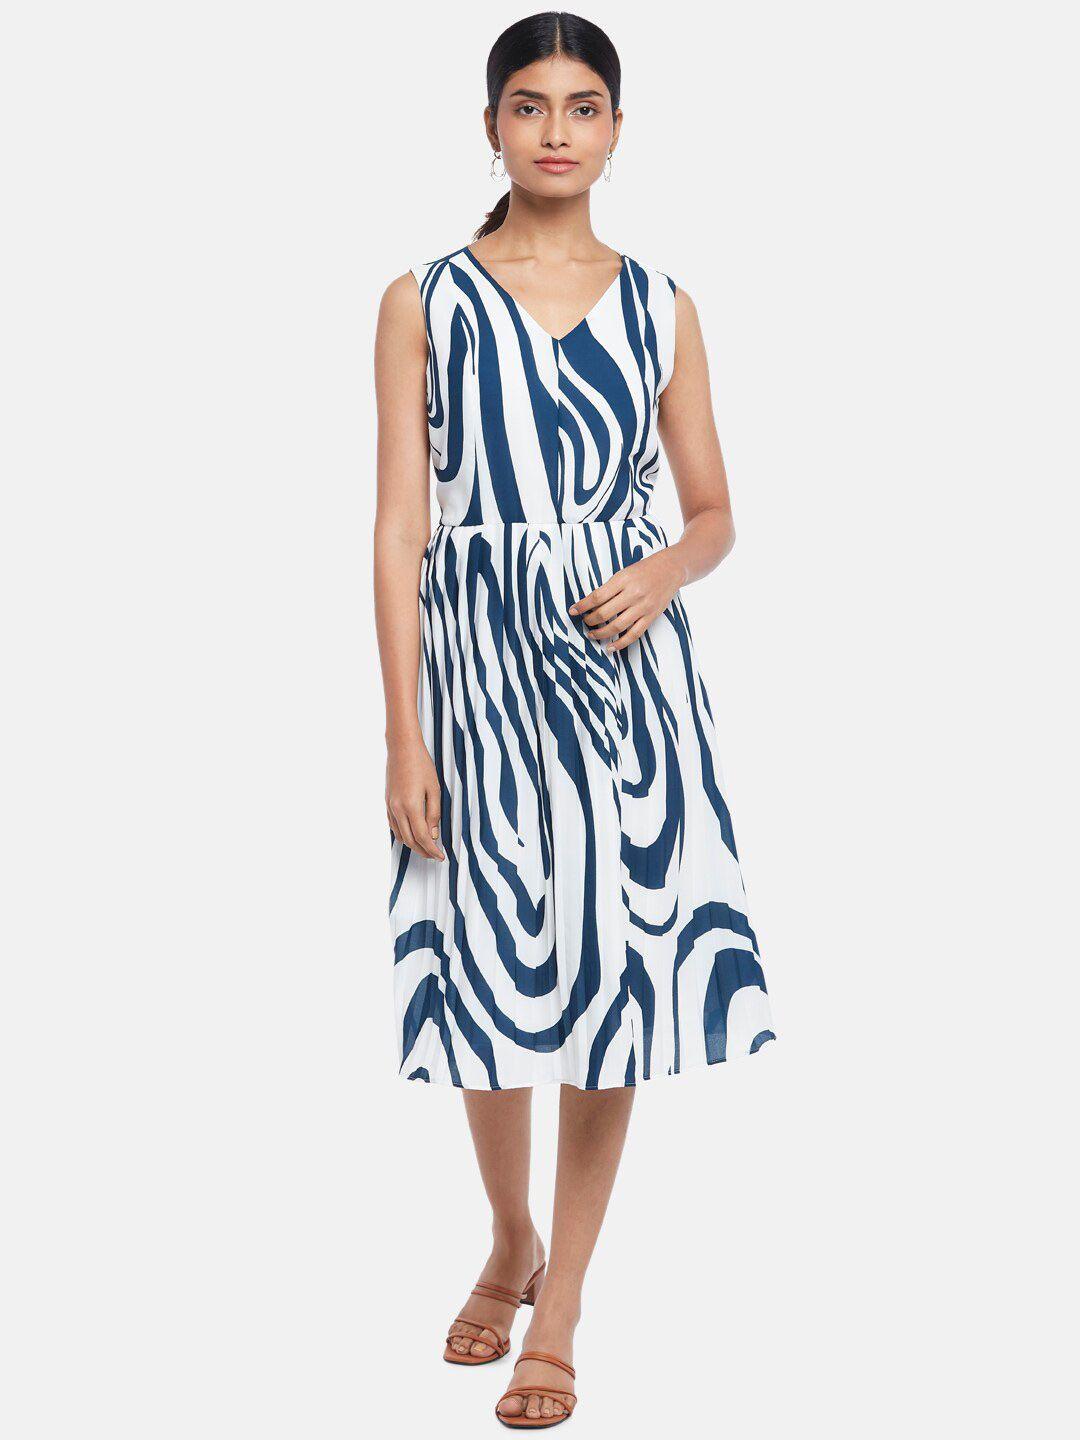 annabelle by pantaloons white & blue abstract printed casual midi dress